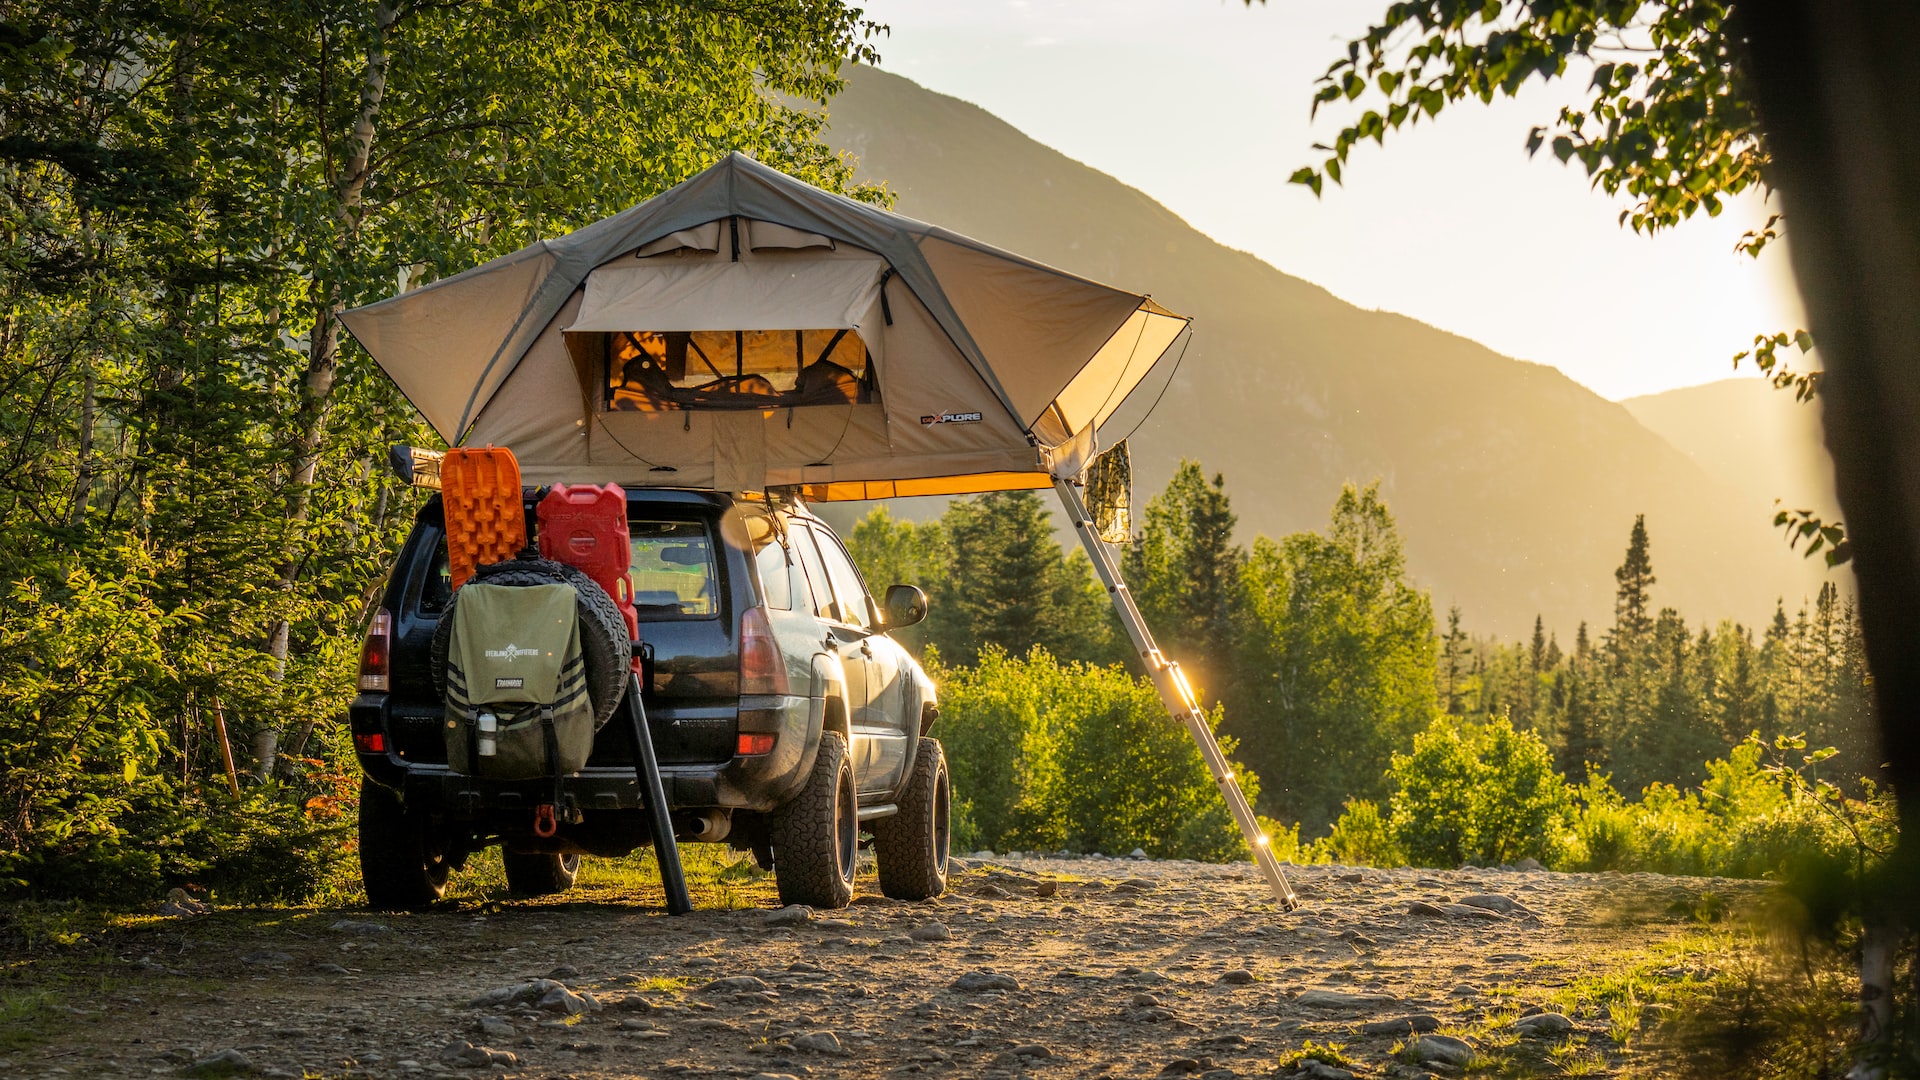 Camping outdoors with a rooftop tent on an SUV (photo: Alfred Boivin)